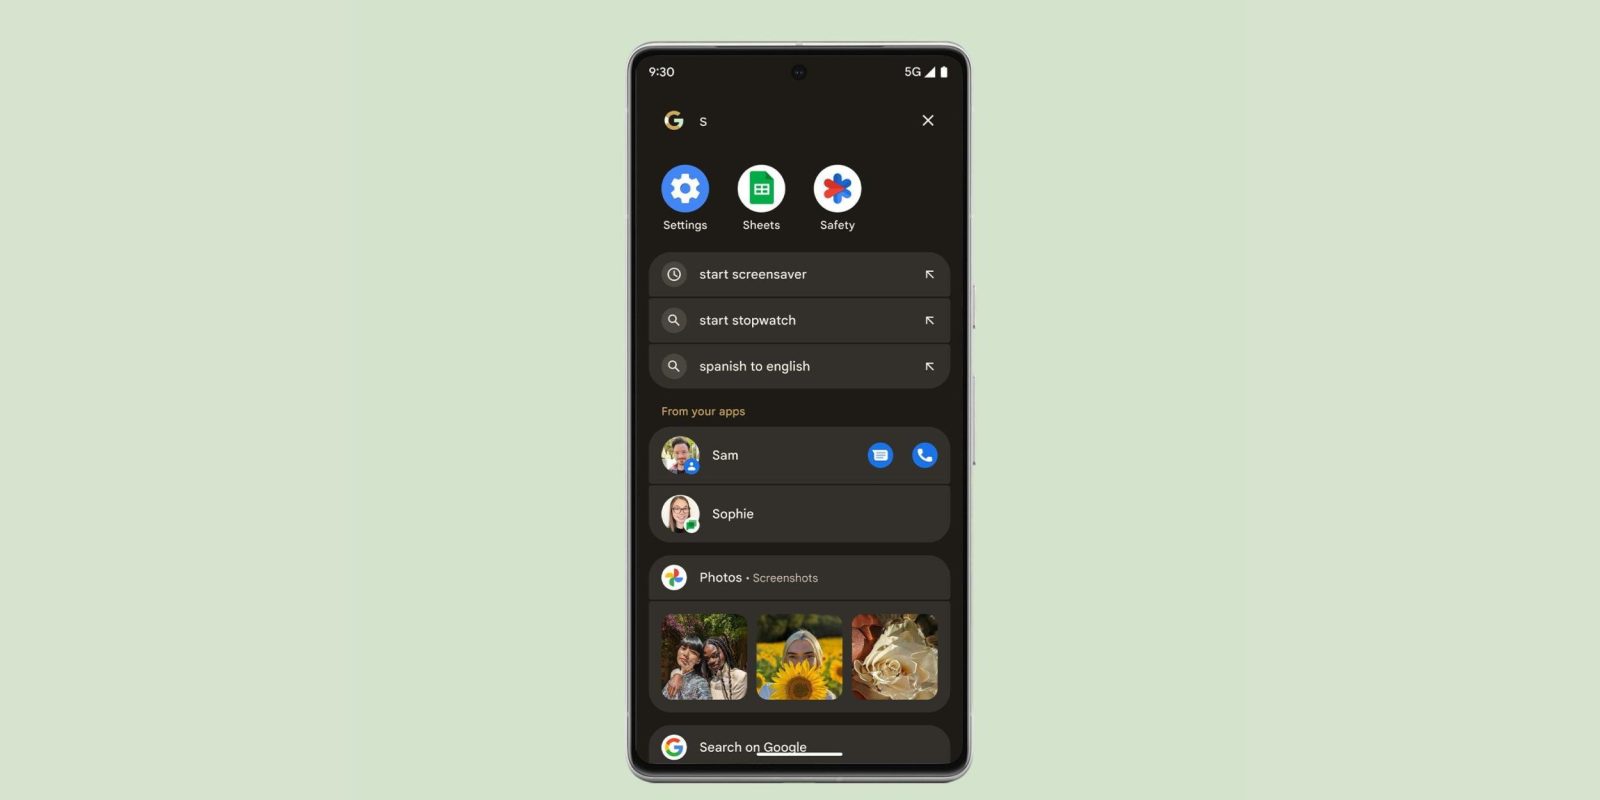 Pixel Launcher search results get a tweaked design